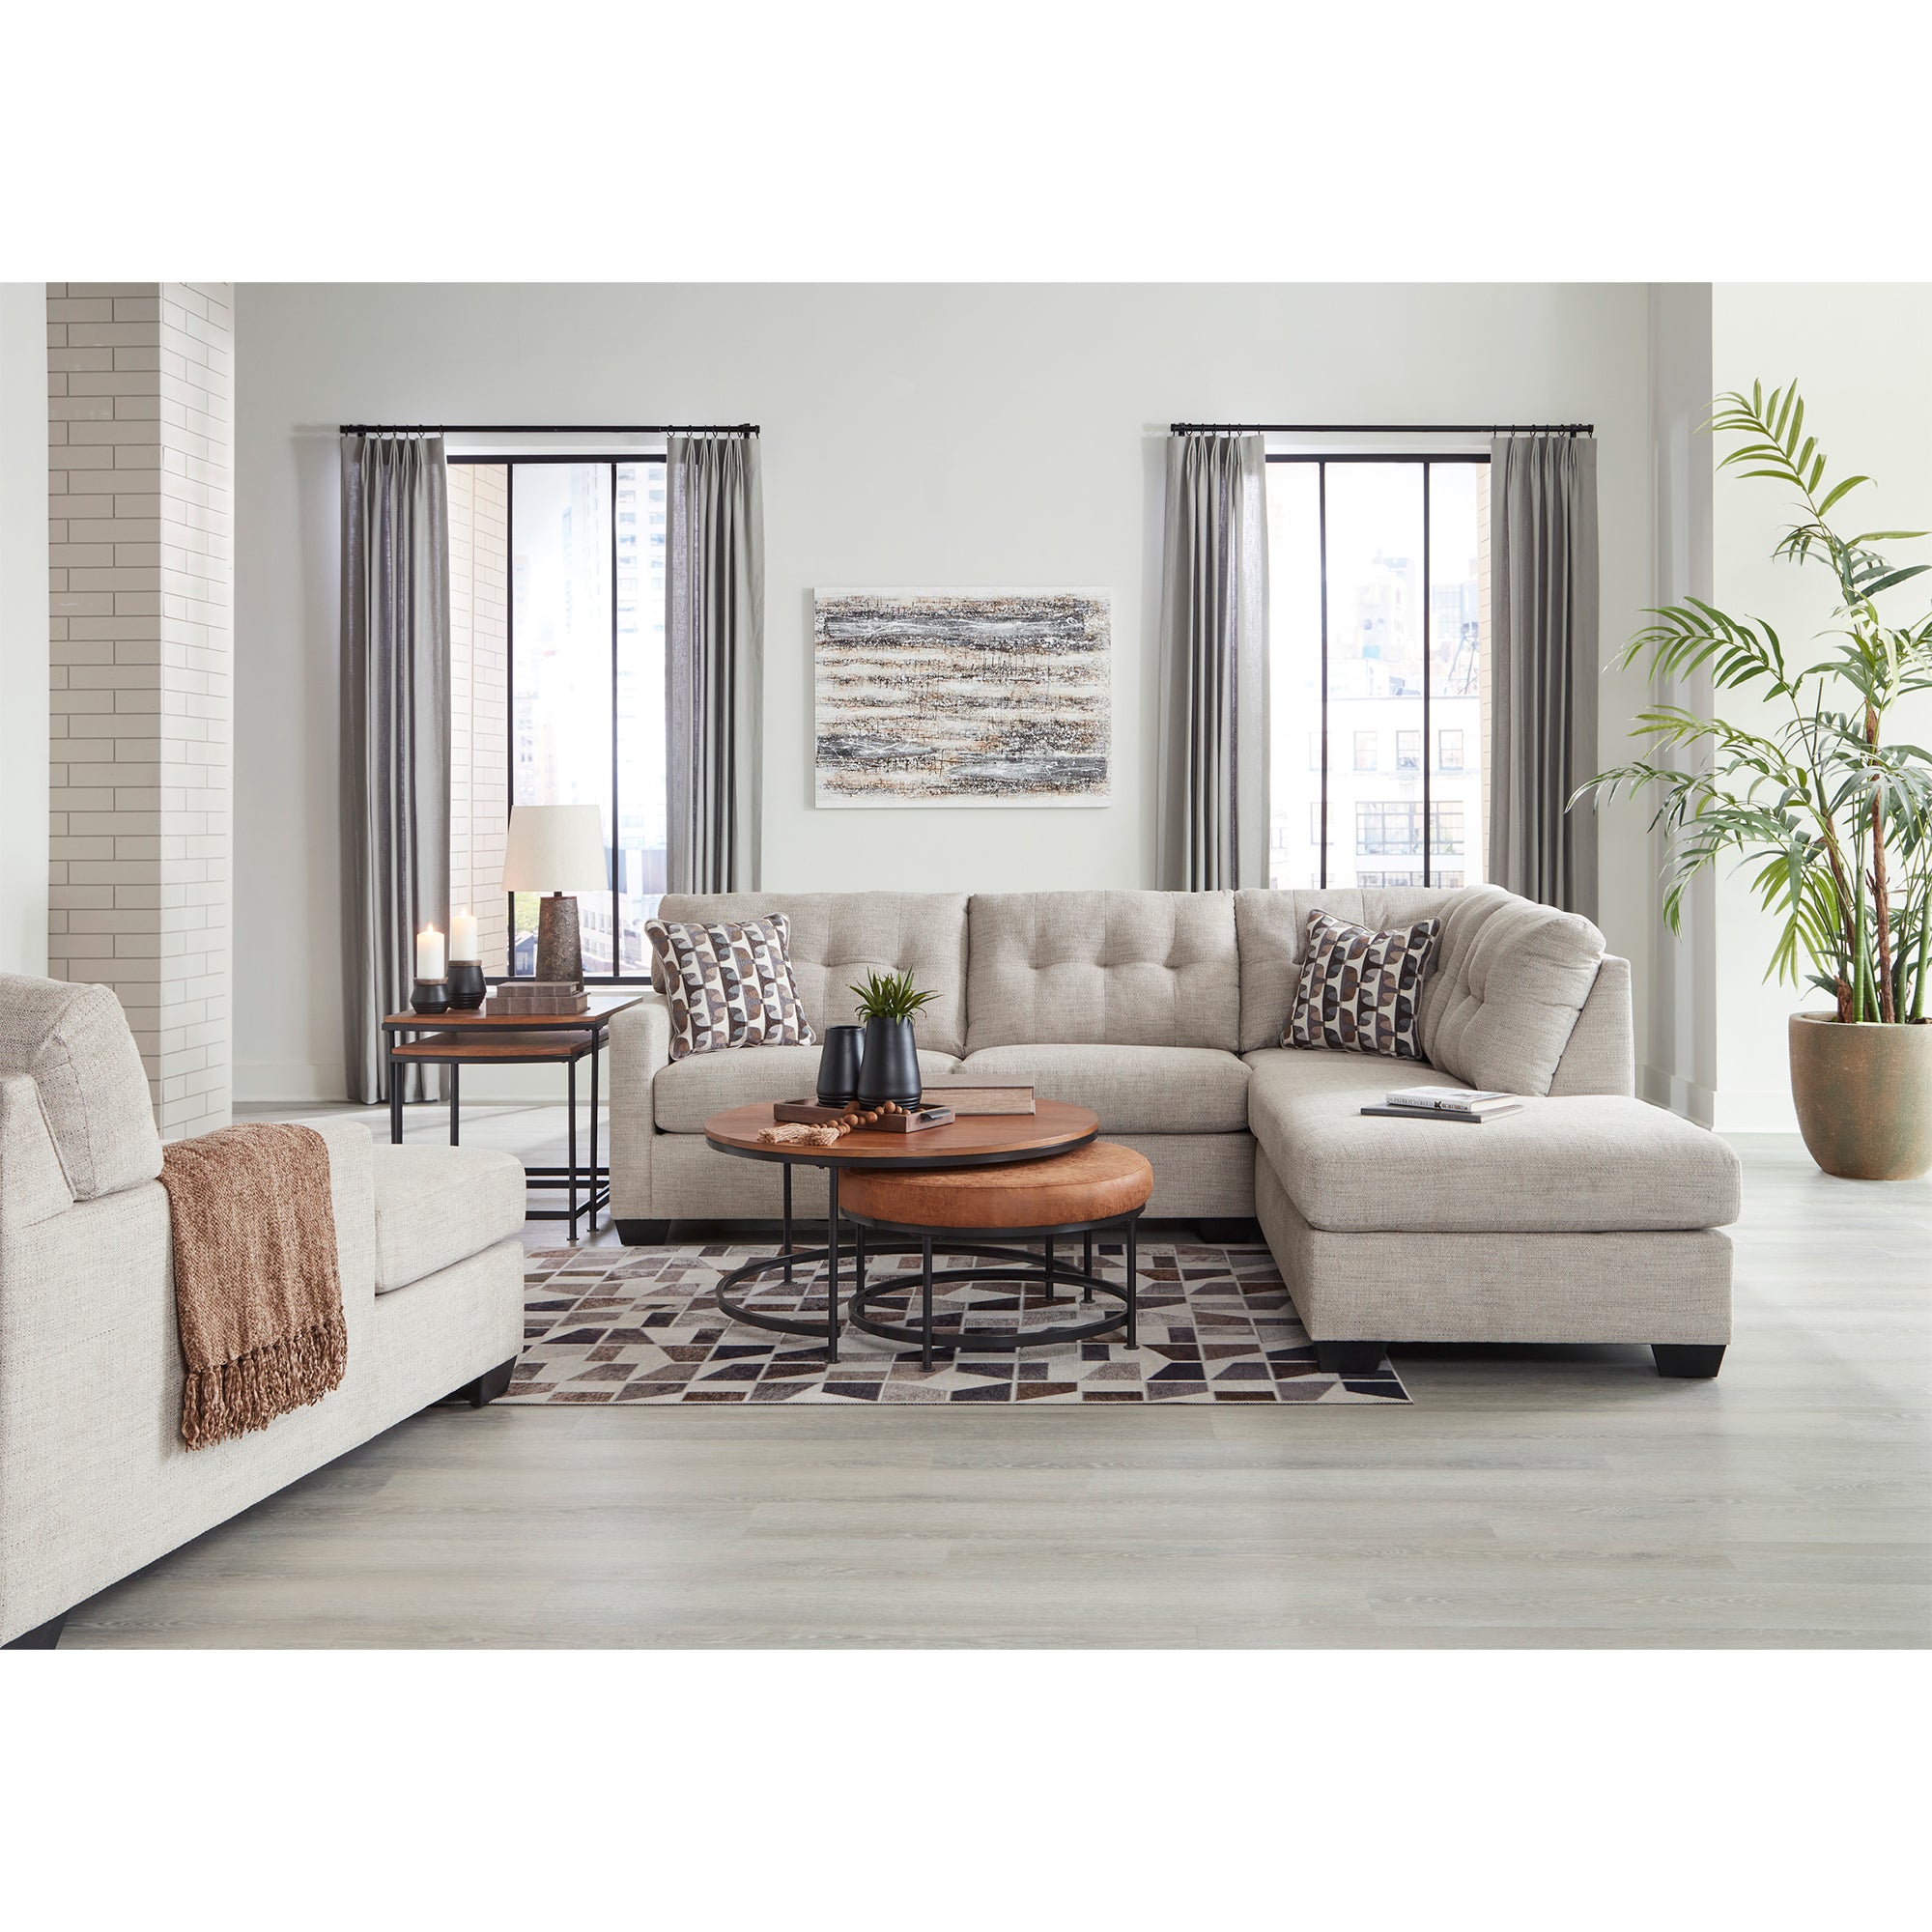 Versatile Mahoney Sectional in pebble color with chaise, blends seamlessly into Milwaukee home decors